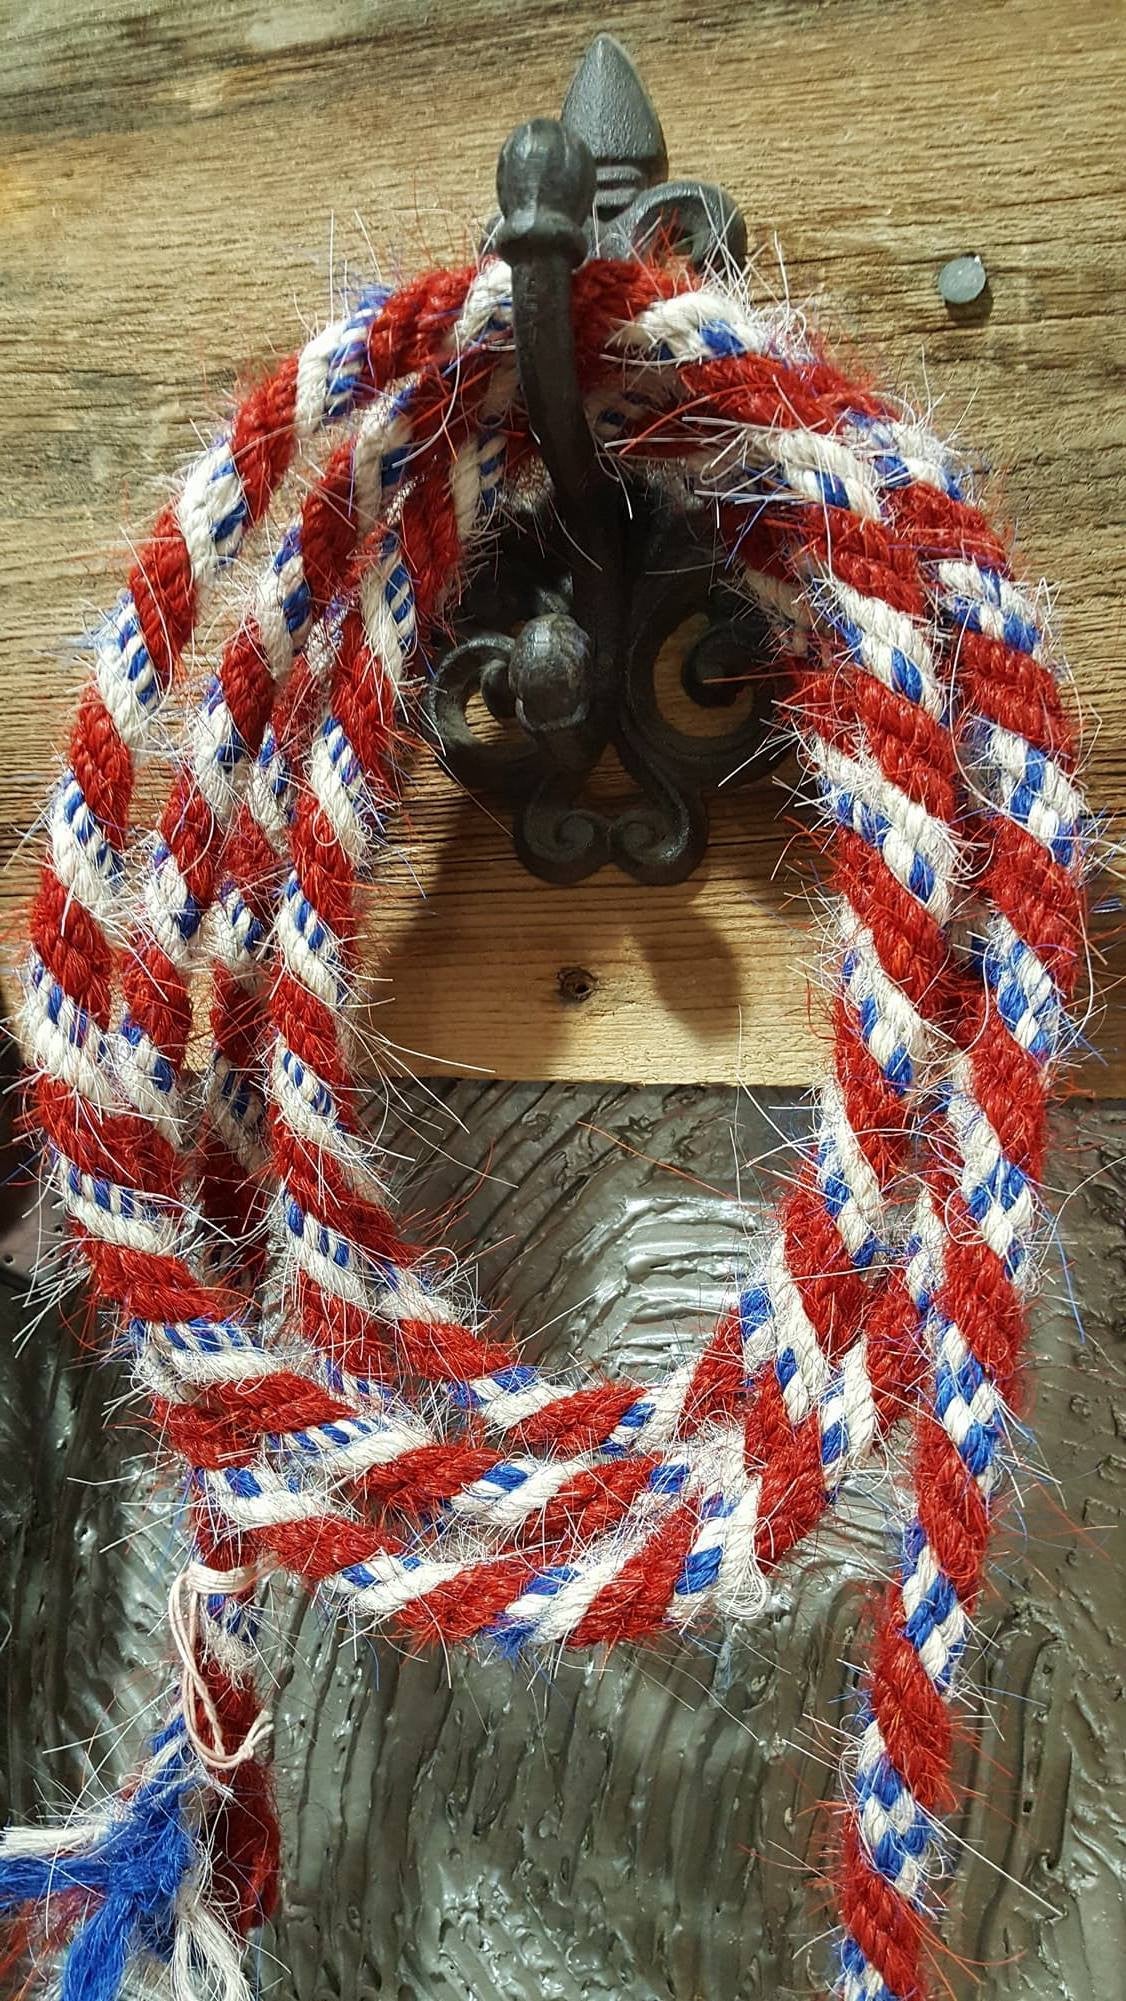 5/8' x 9' Mane Hair Loop Rein in red, white, and blue